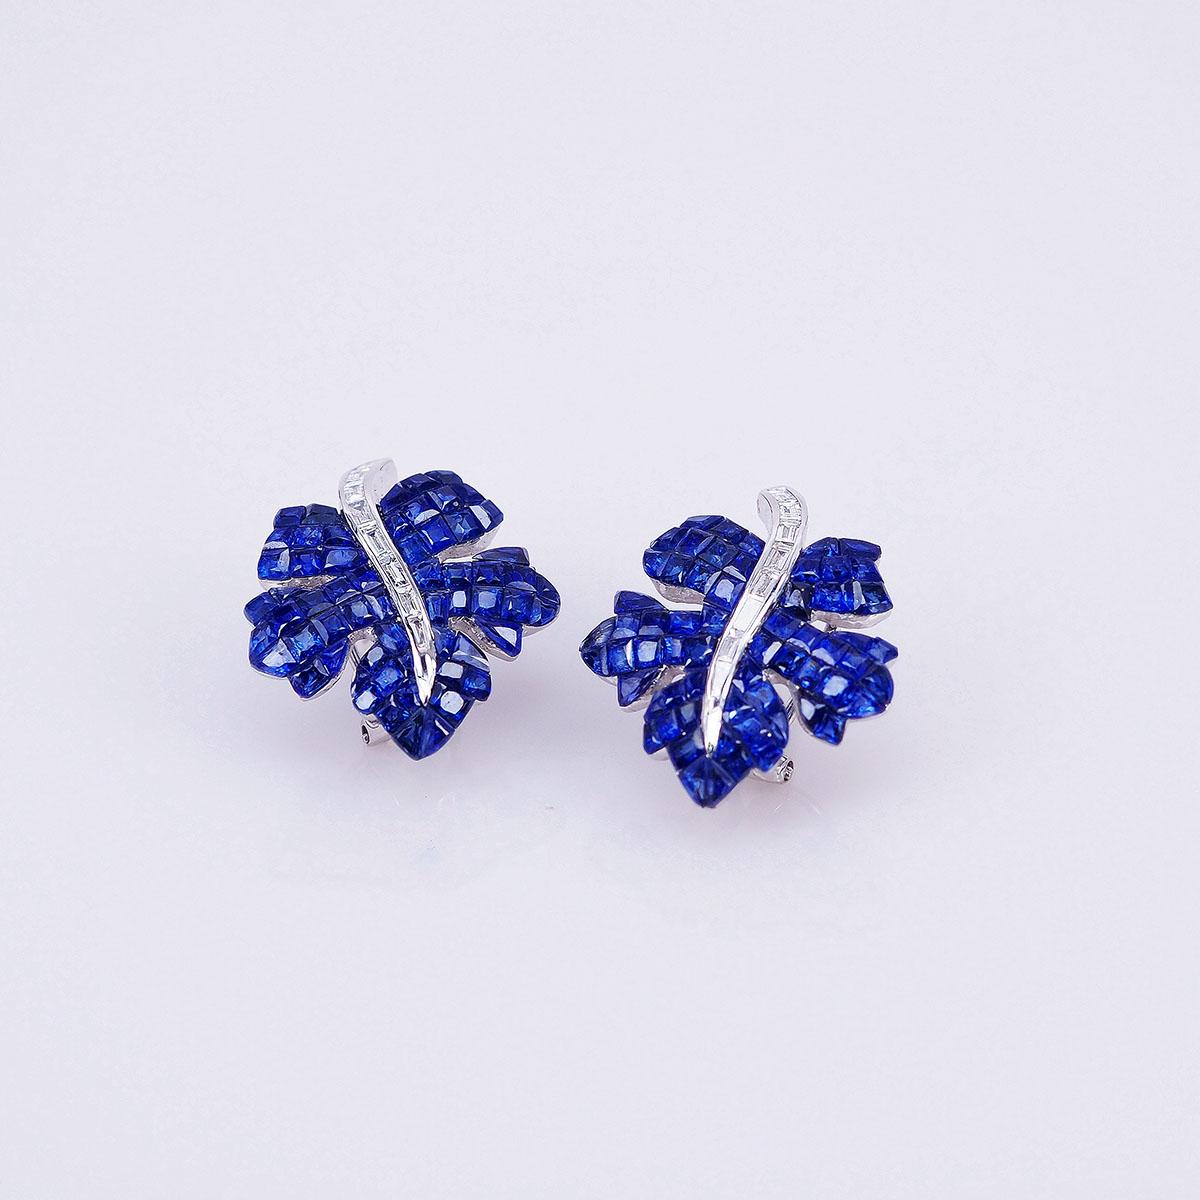 Sapphire ear clip earrings design as classic luxury elegant style.You can use for everyday and also for the evening party.We use the top quality Sapphire which make in invisible setting.We set the stone in perfection as we are professional in this